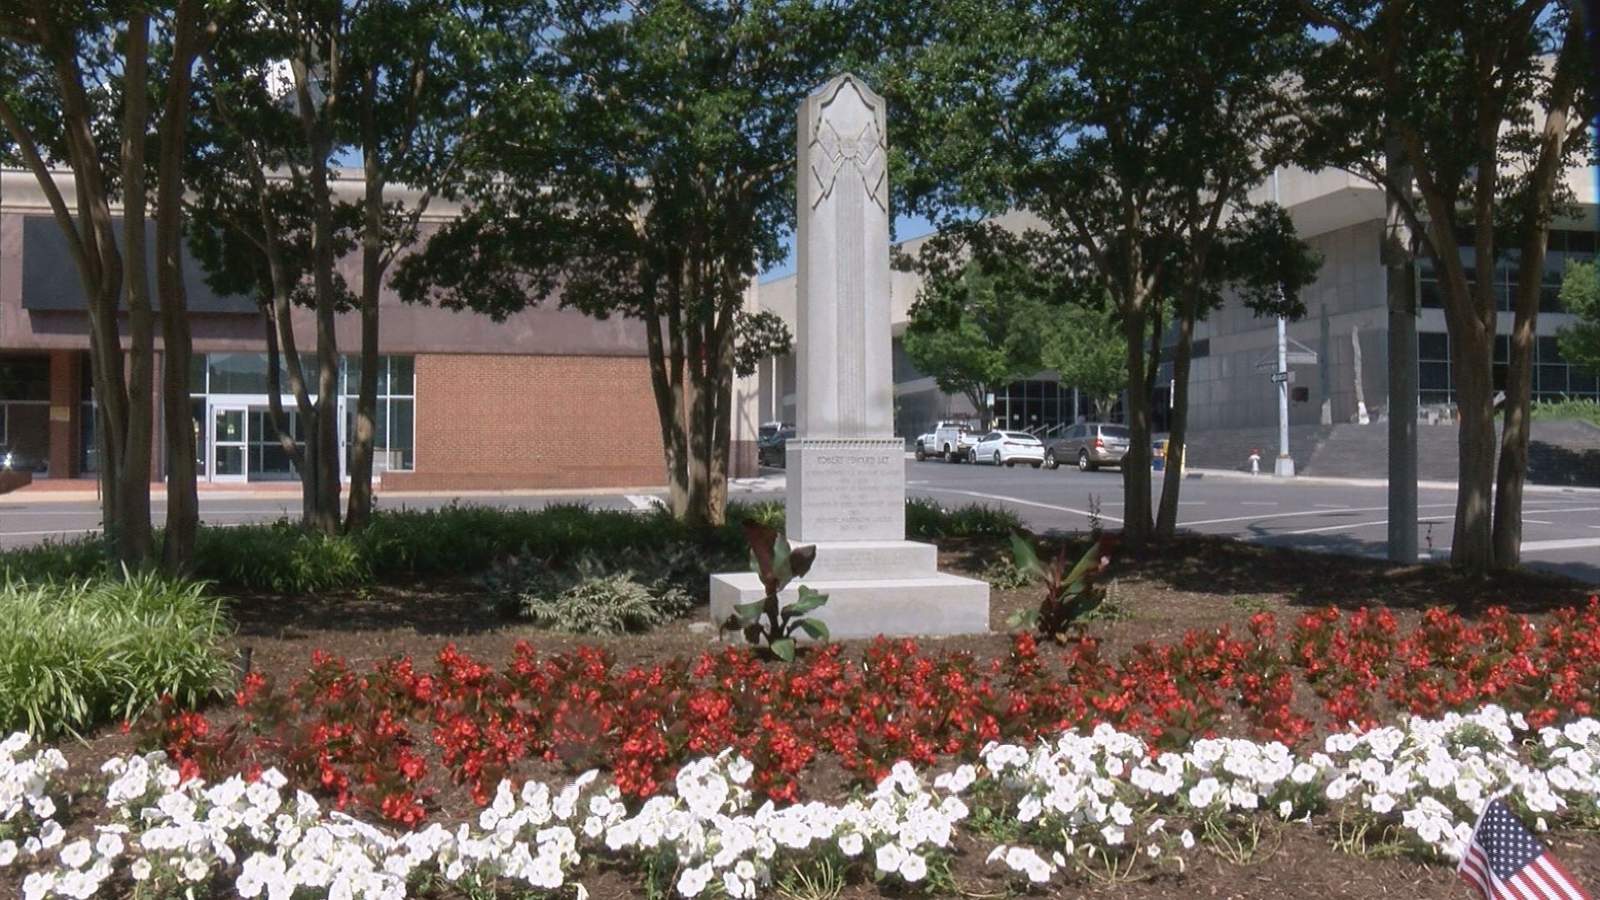 Roanoke Confederate monument could soon be removed